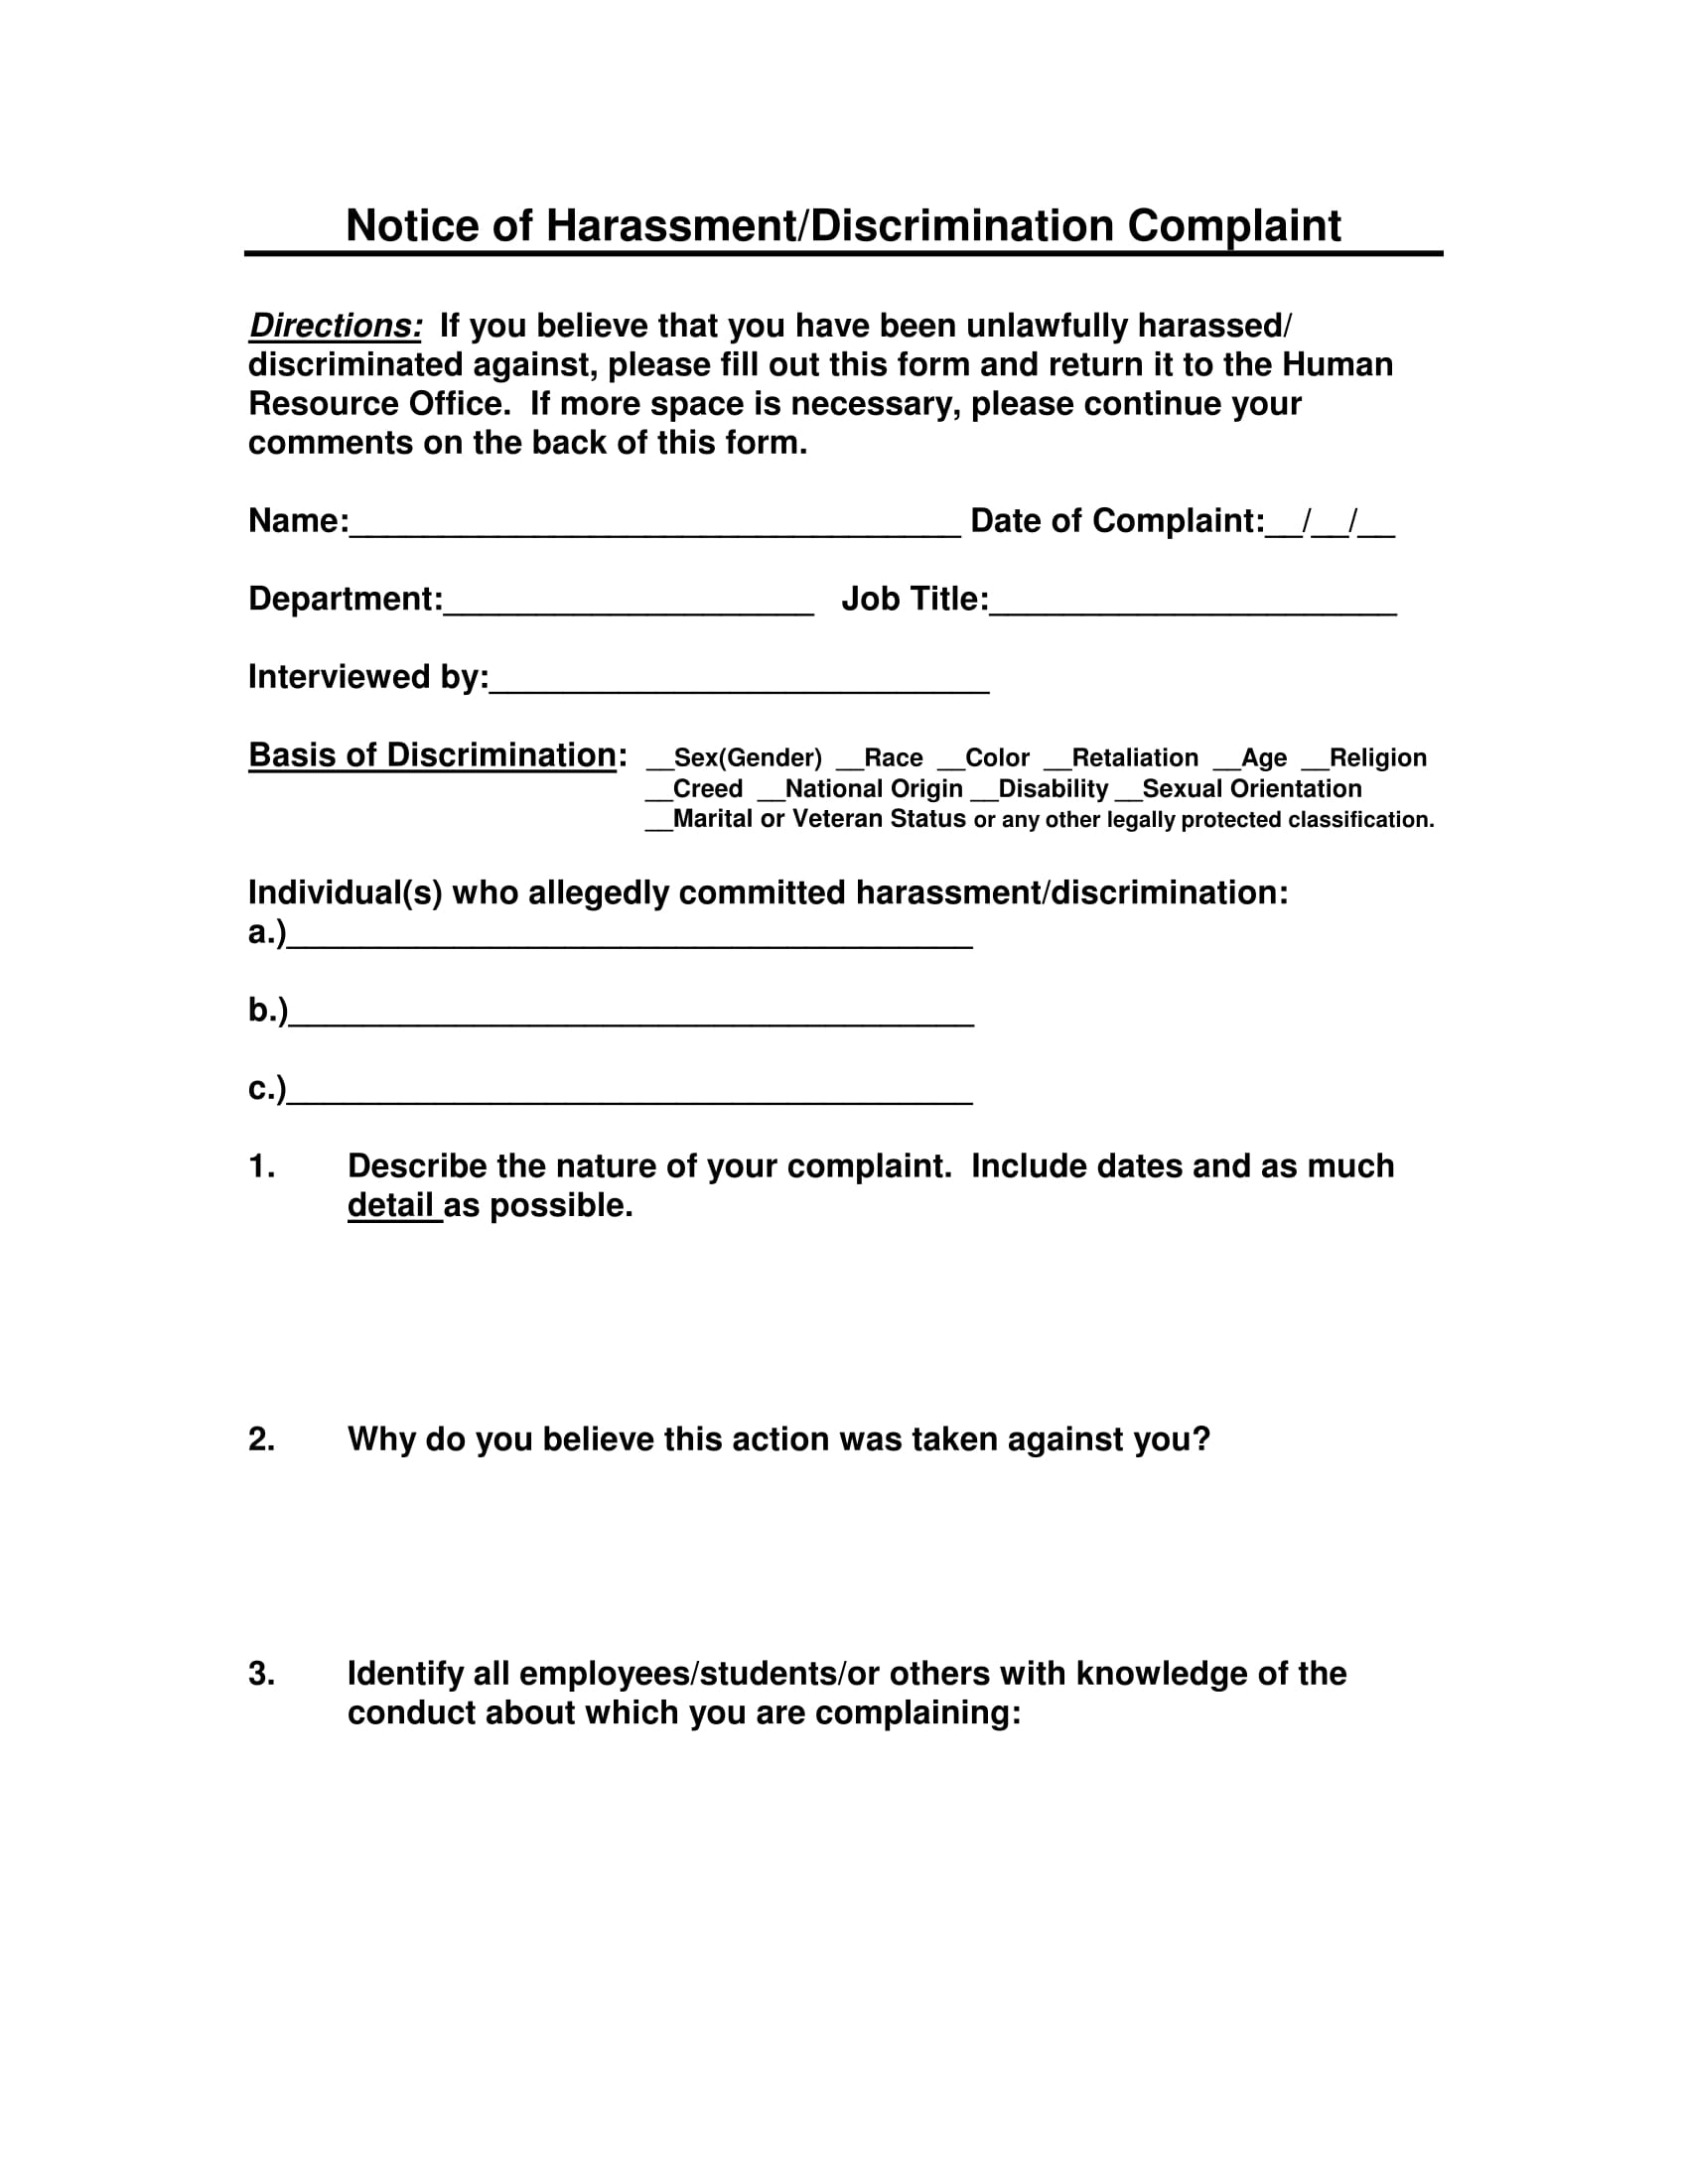 notice of harassment complaint form 1